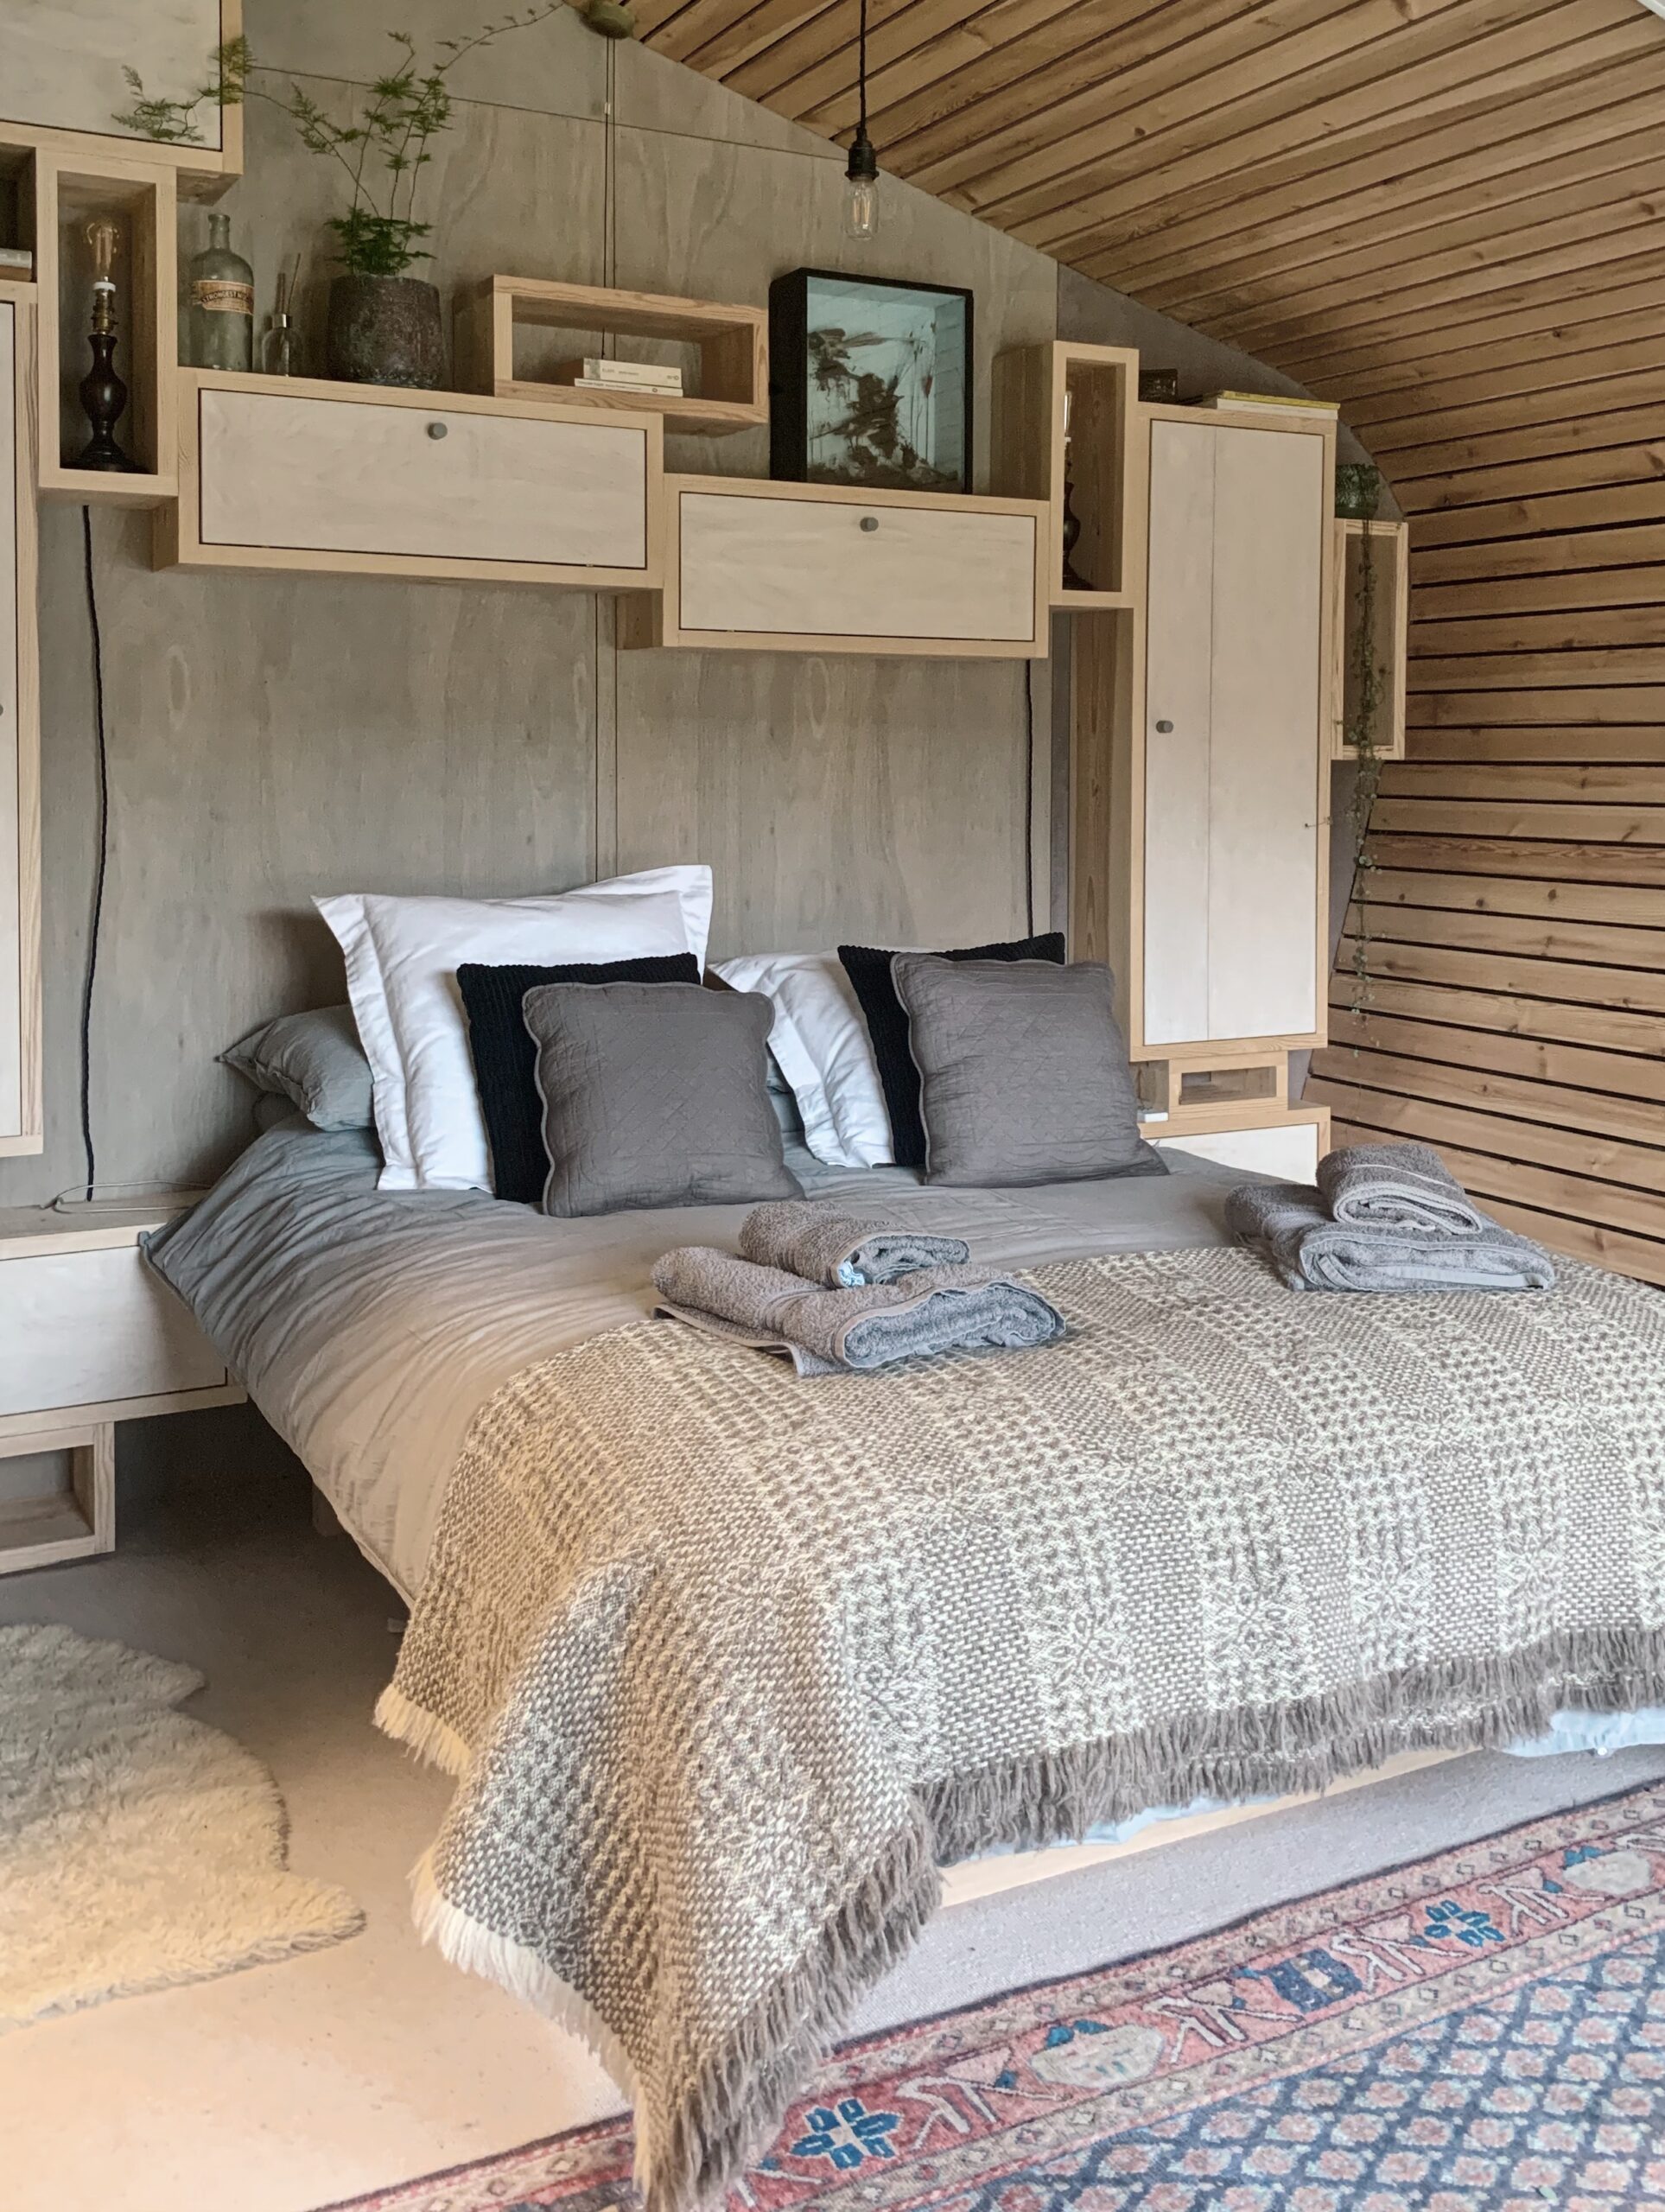 Red Kite Cabin bed